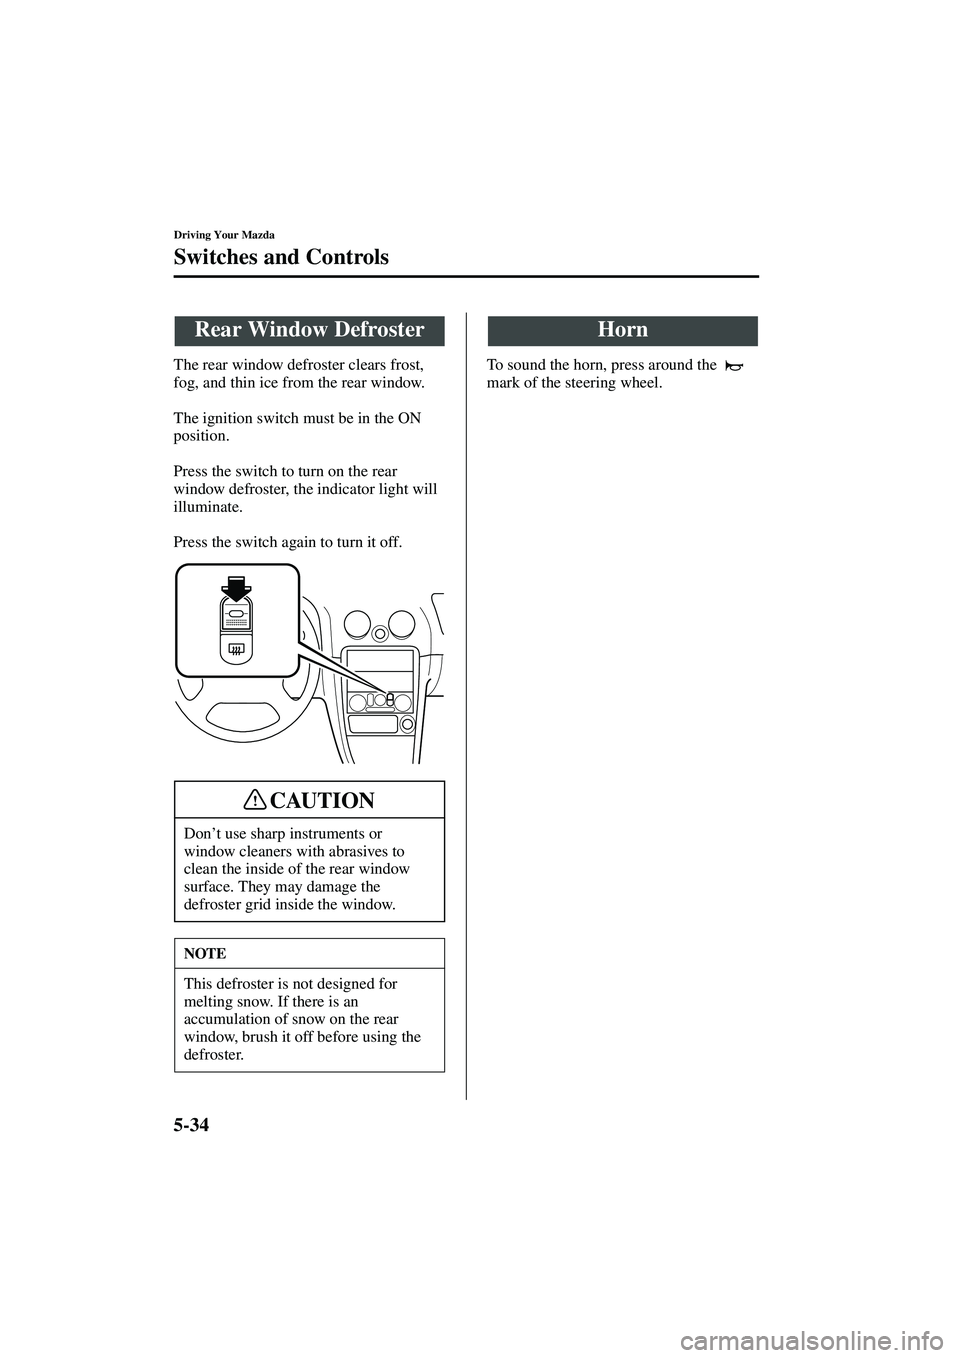 MAZDA MODEL MX-5 MIATA 2003  Owners Manual 5-34
Driving Your Mazda
Switches and Controls
Form No. 8R09-EA-02G
The rear window defroster clears frost, 
fog, and thin ice from the rear window.
The ignition switch must be in the ON 
position.
Pre